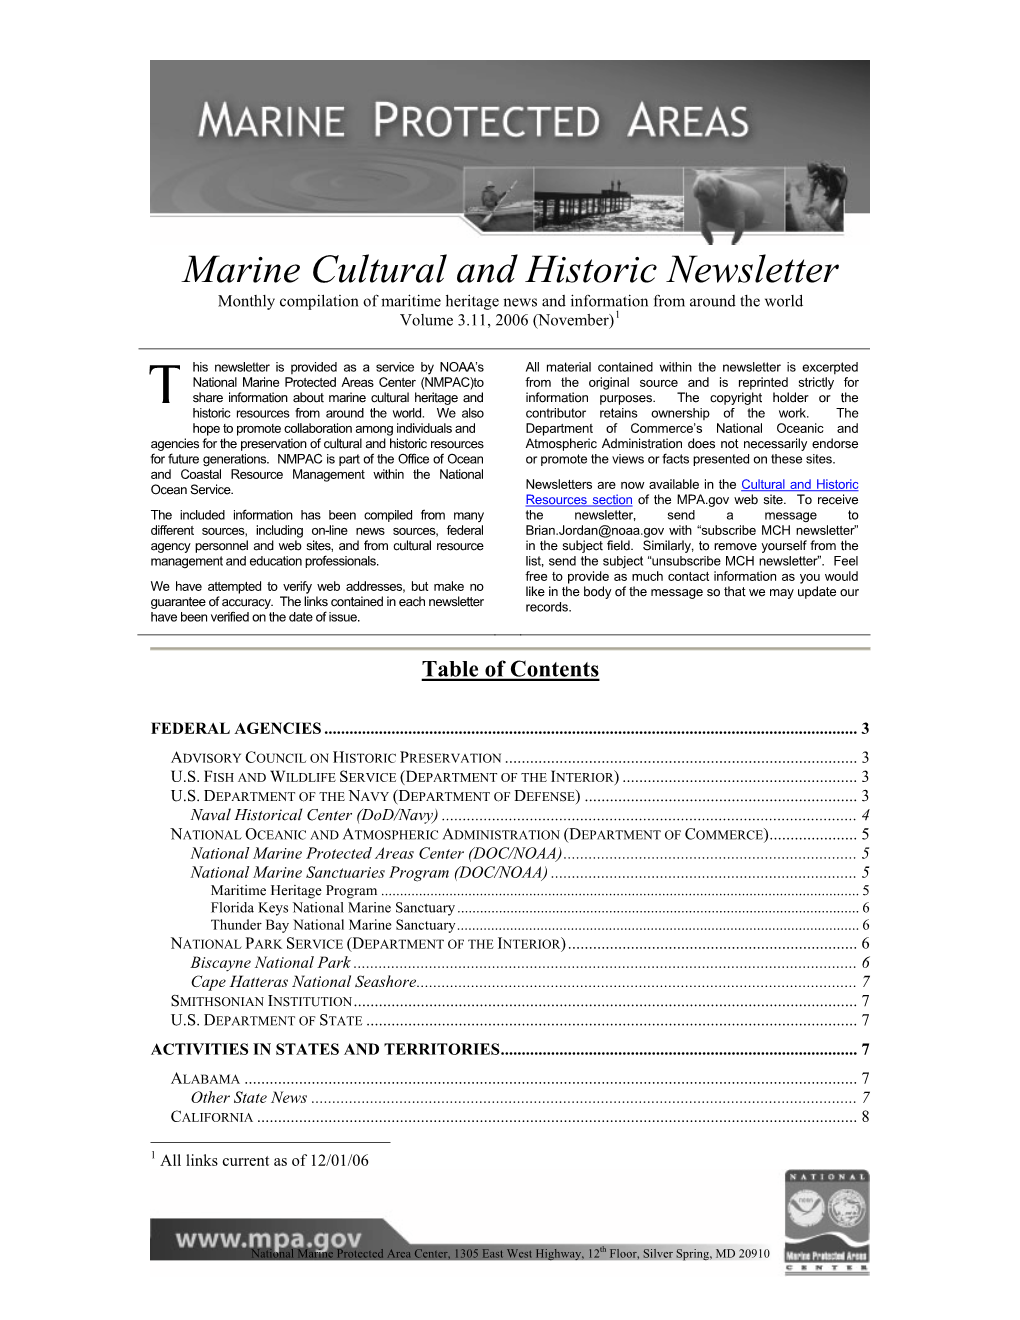 Marine Cultural and Historic Newsletter Vol 3(11)